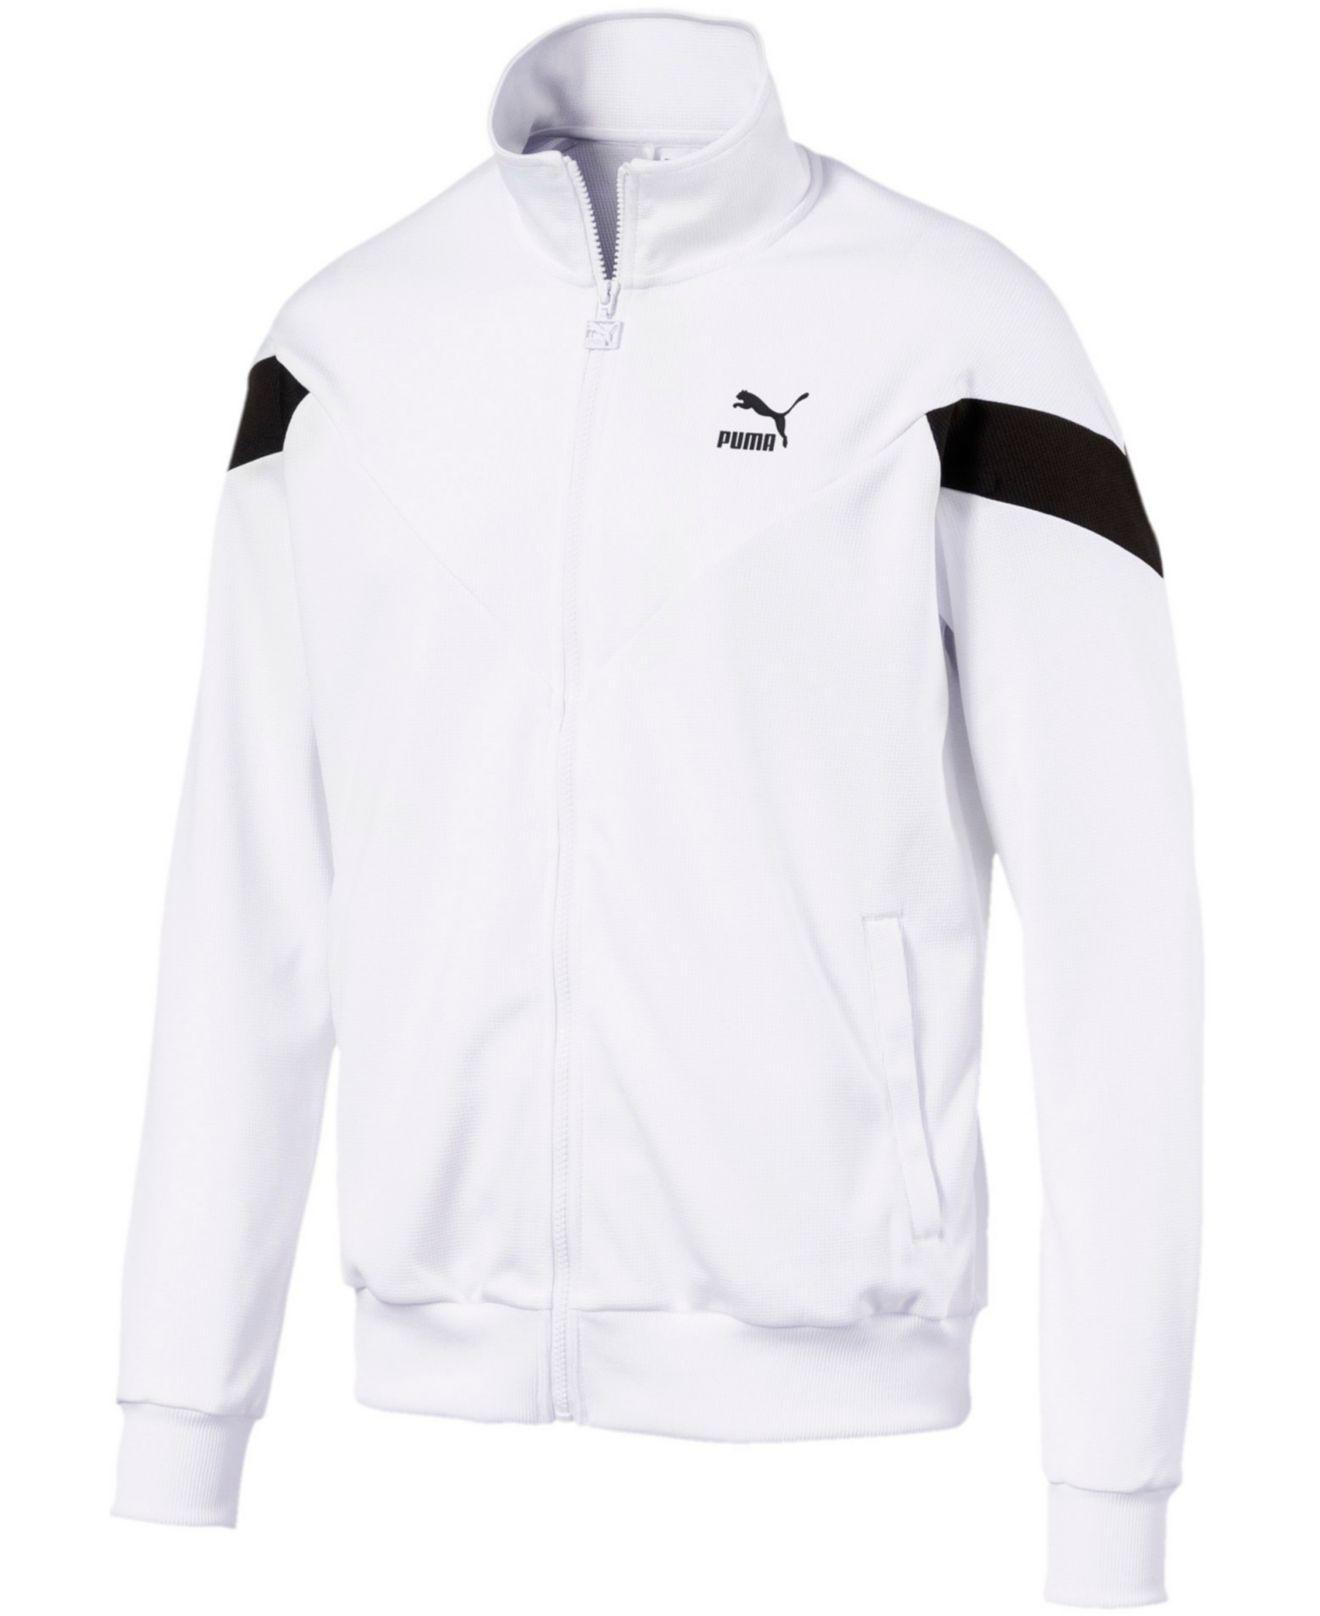 PUMA Synthetic Colorblocked Track Jacket in White for Men - Save 40% - Lyst